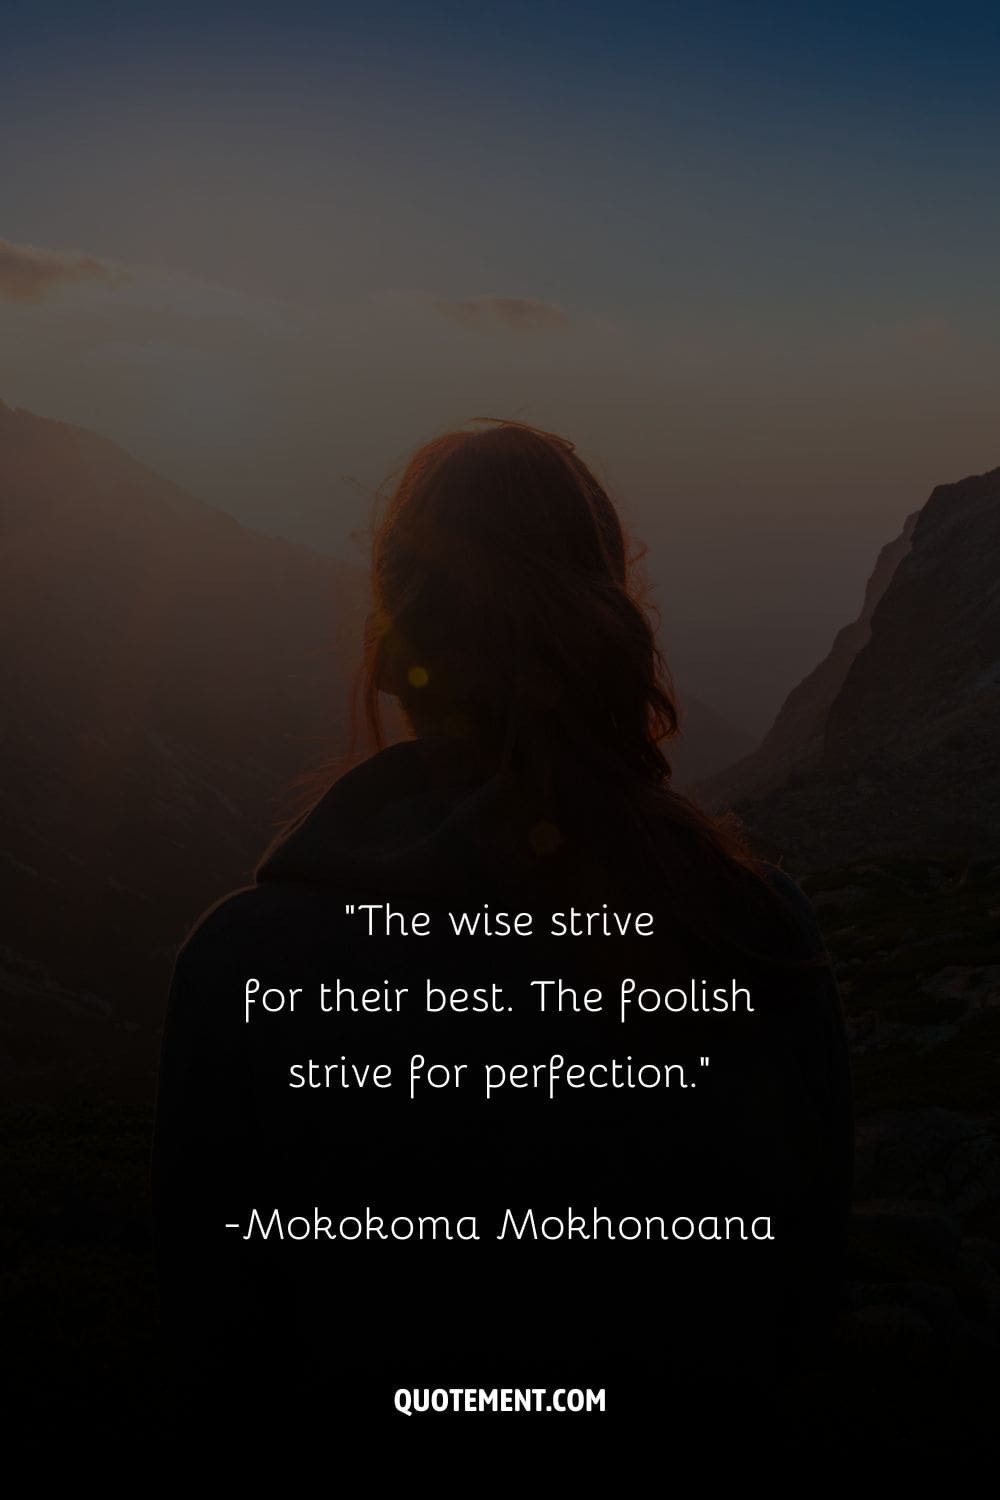 The wise strive for their best. The foolish strive for perfection